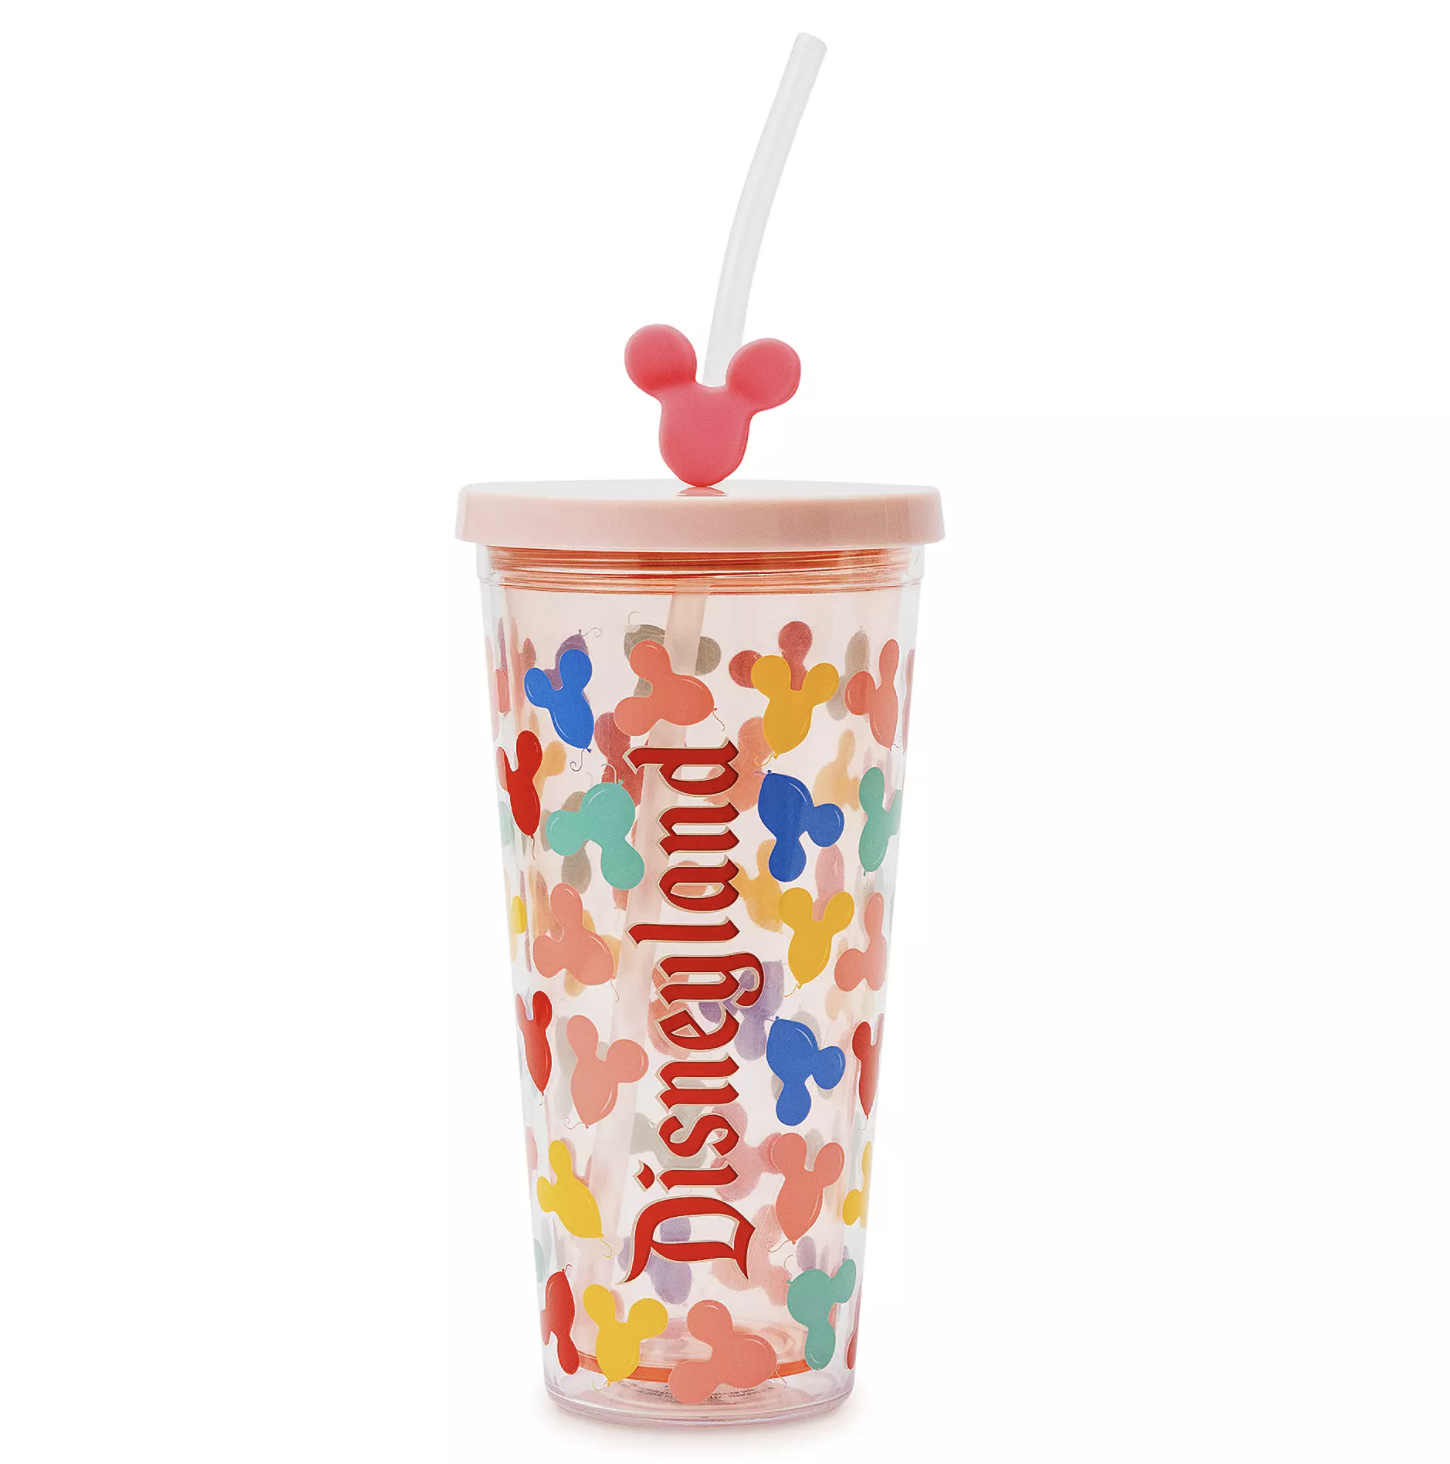 Get Your Daily Dose of Hydration With These NEW Disney Tumblers! 